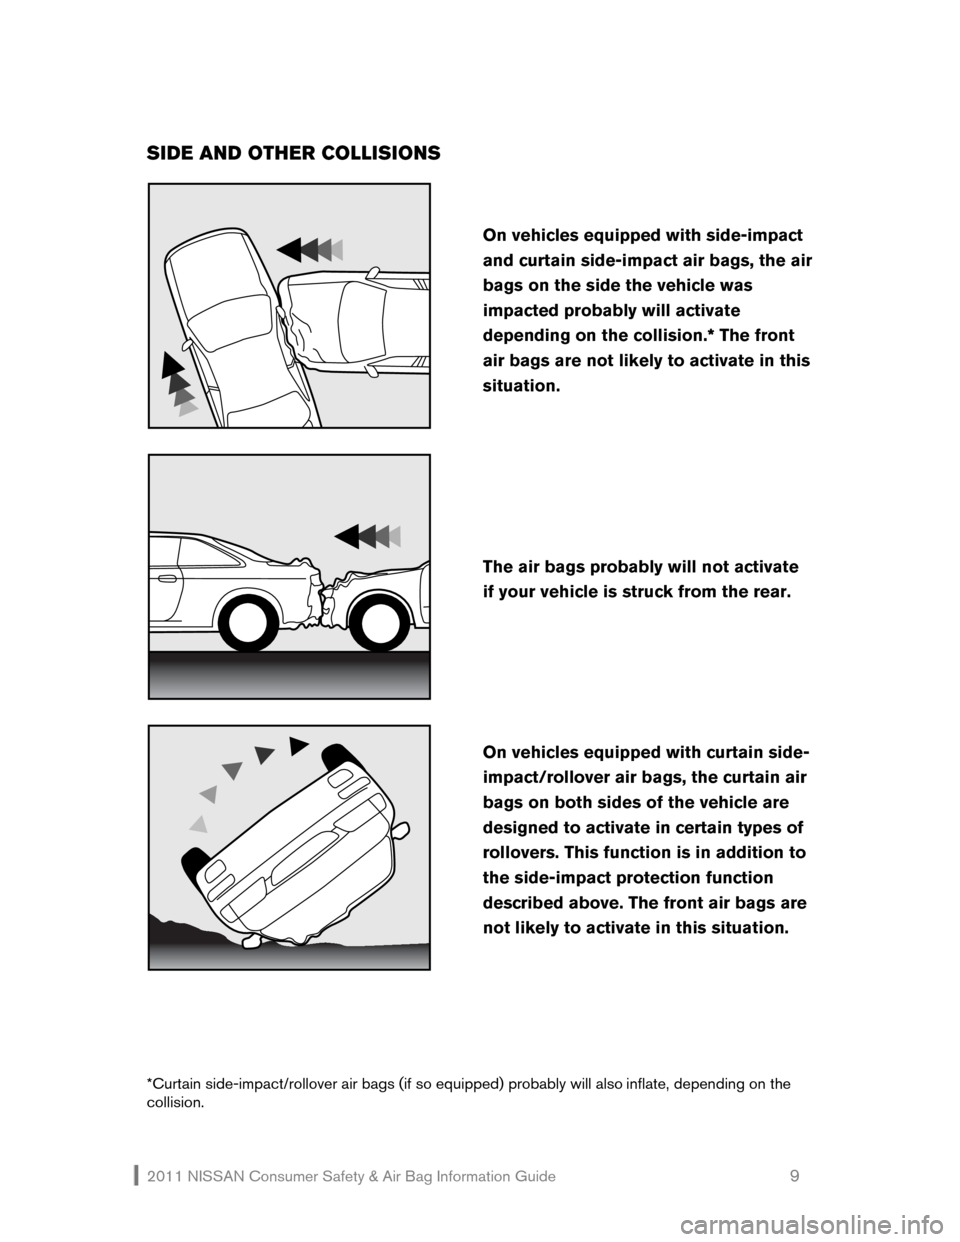 NISSAN ROGUE 2011 1.G Consumer Safety Air Bag Information Guide 2011 NISSAN Consumer Safety & Air Bag Information Guide                                                       9 
SIDE AND OTHER COLLISIONS 
 
 
 
 
 
*Curtain side-impact/rollover air bags (if so equi